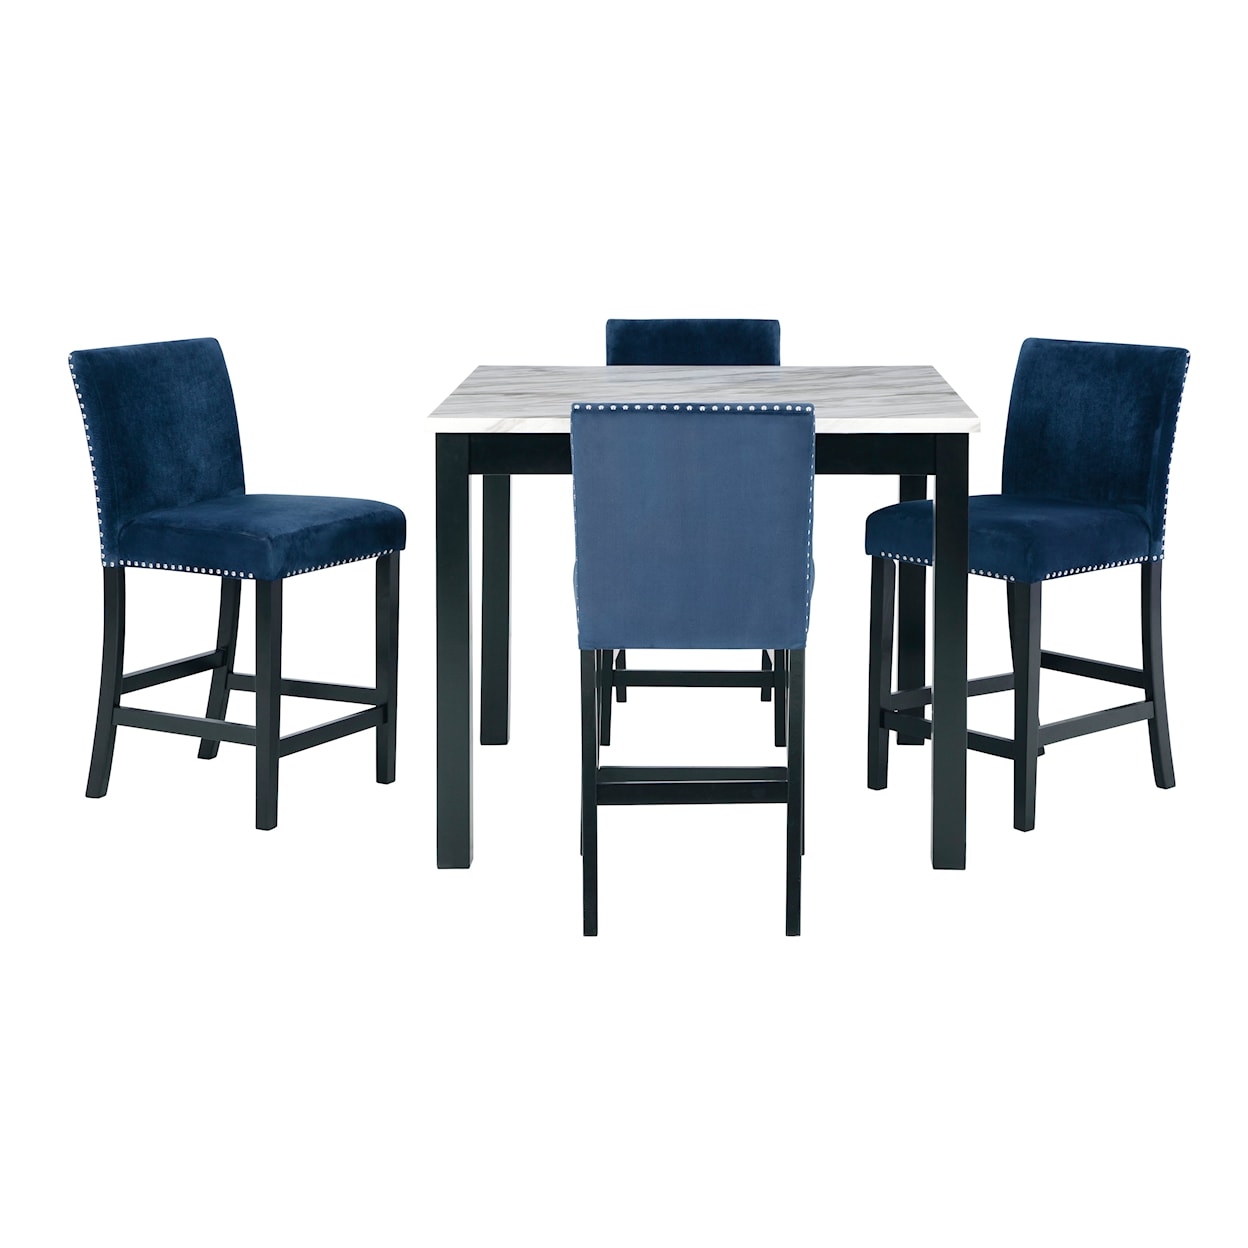 Benchcraft Cranderlyn 5-Piece Counter Dining Table Set